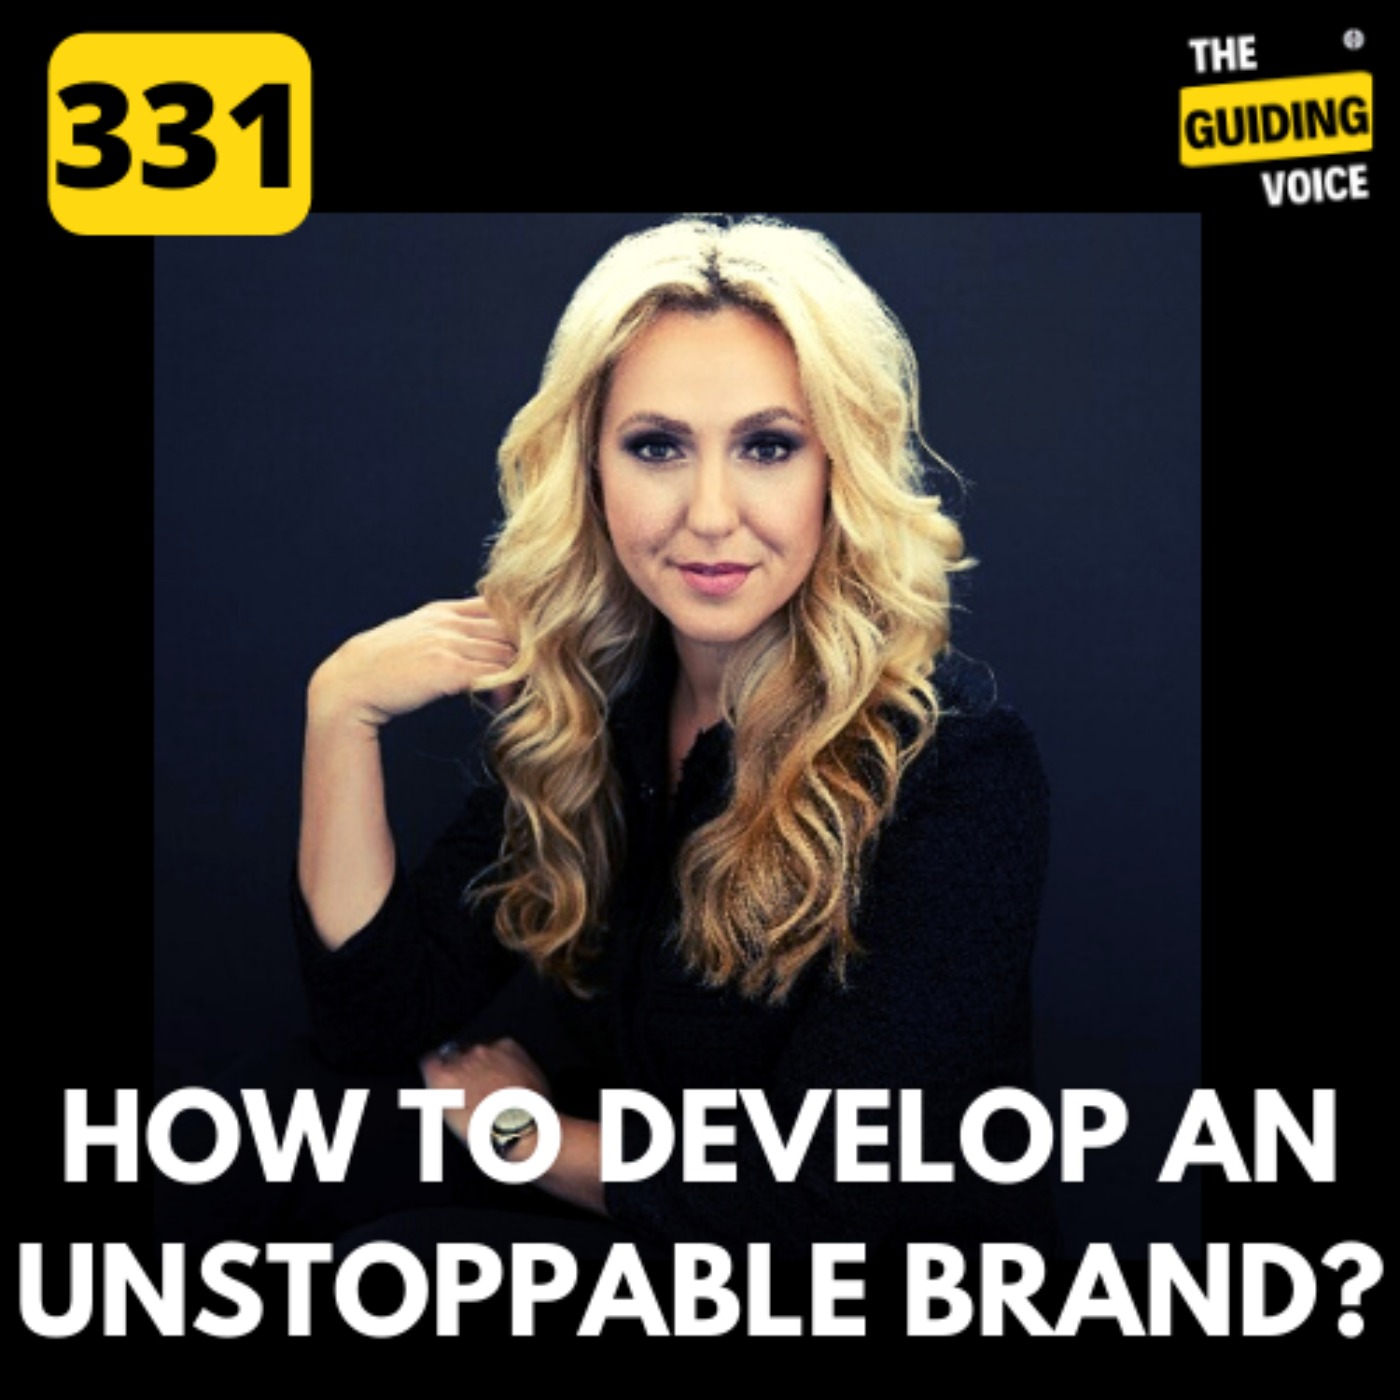 HOW TO DEVELOP AN UNSTOPPABLE BRAND? | MILA GRIGG | #TGV331